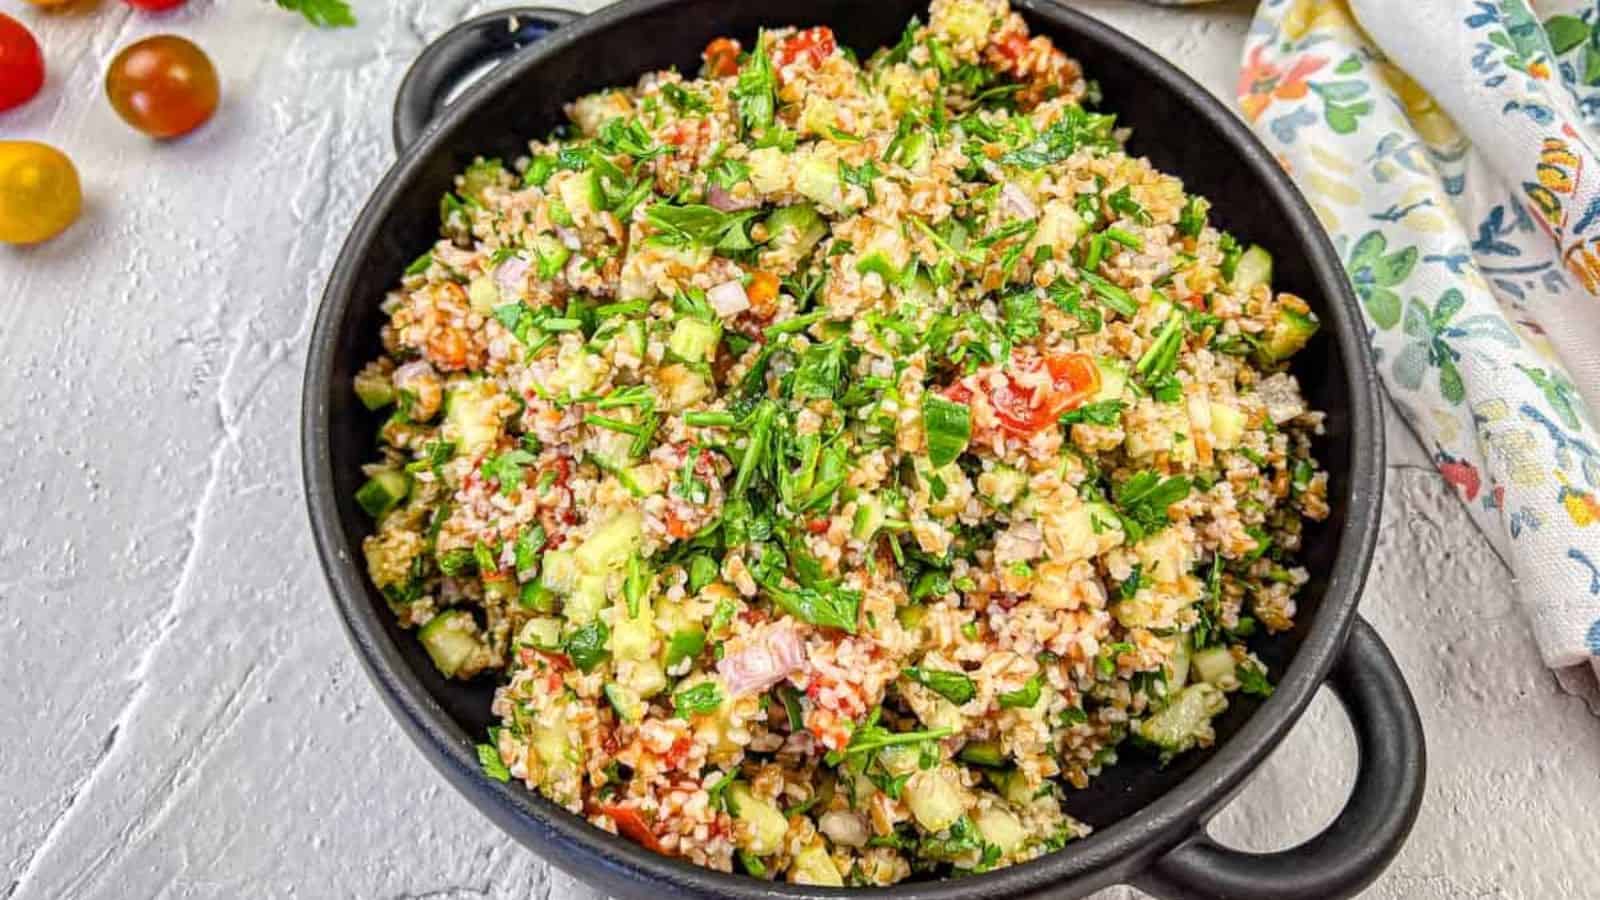 A black bowl filled with tabbouleh salad with smoked tomatoes.